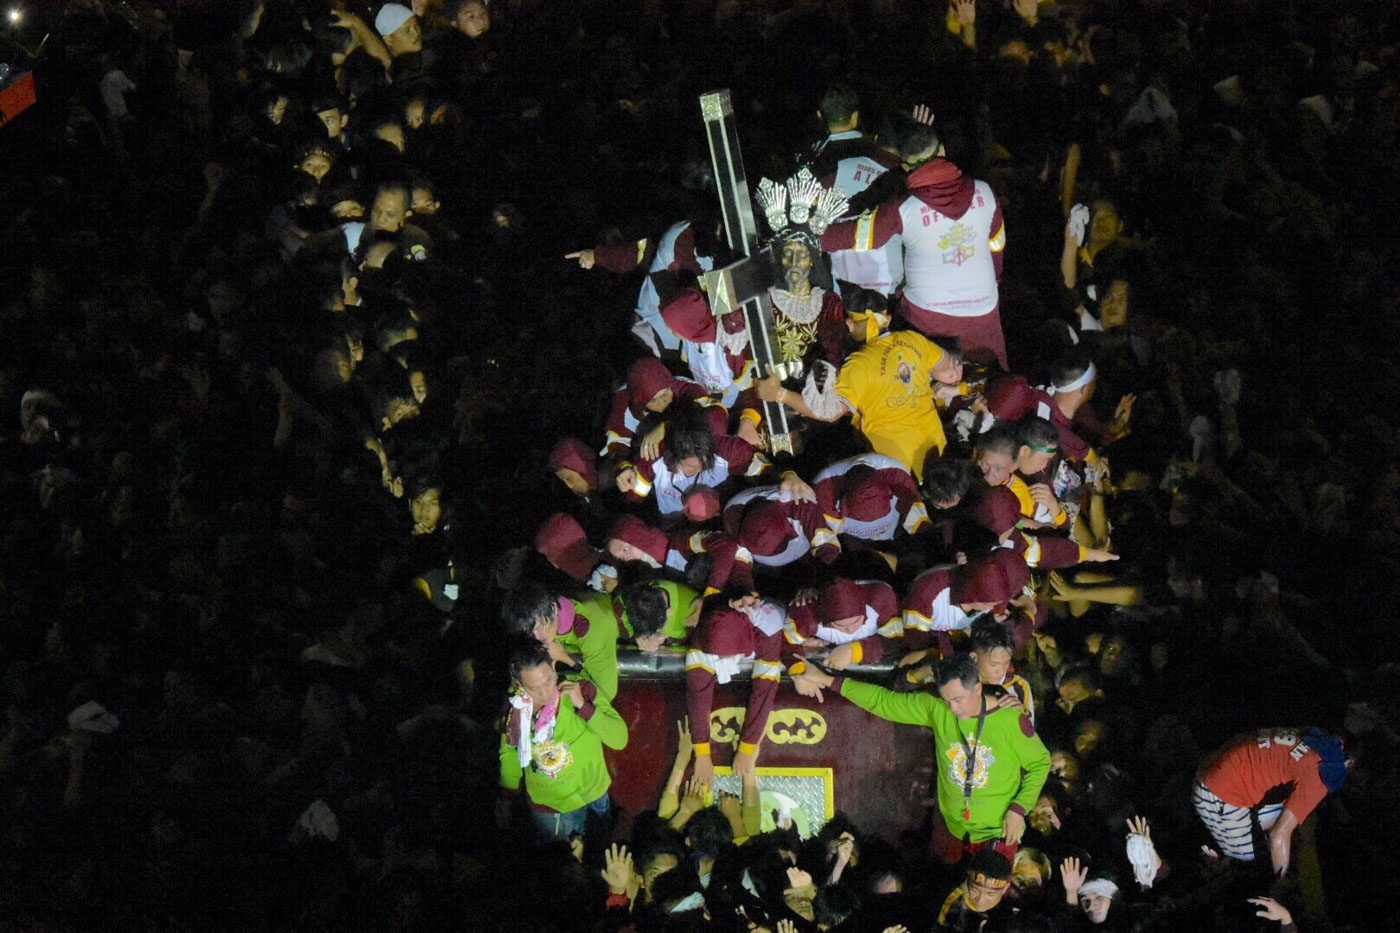 IN VIDEOS: The colorful Feast of the Black Nazarene 2019